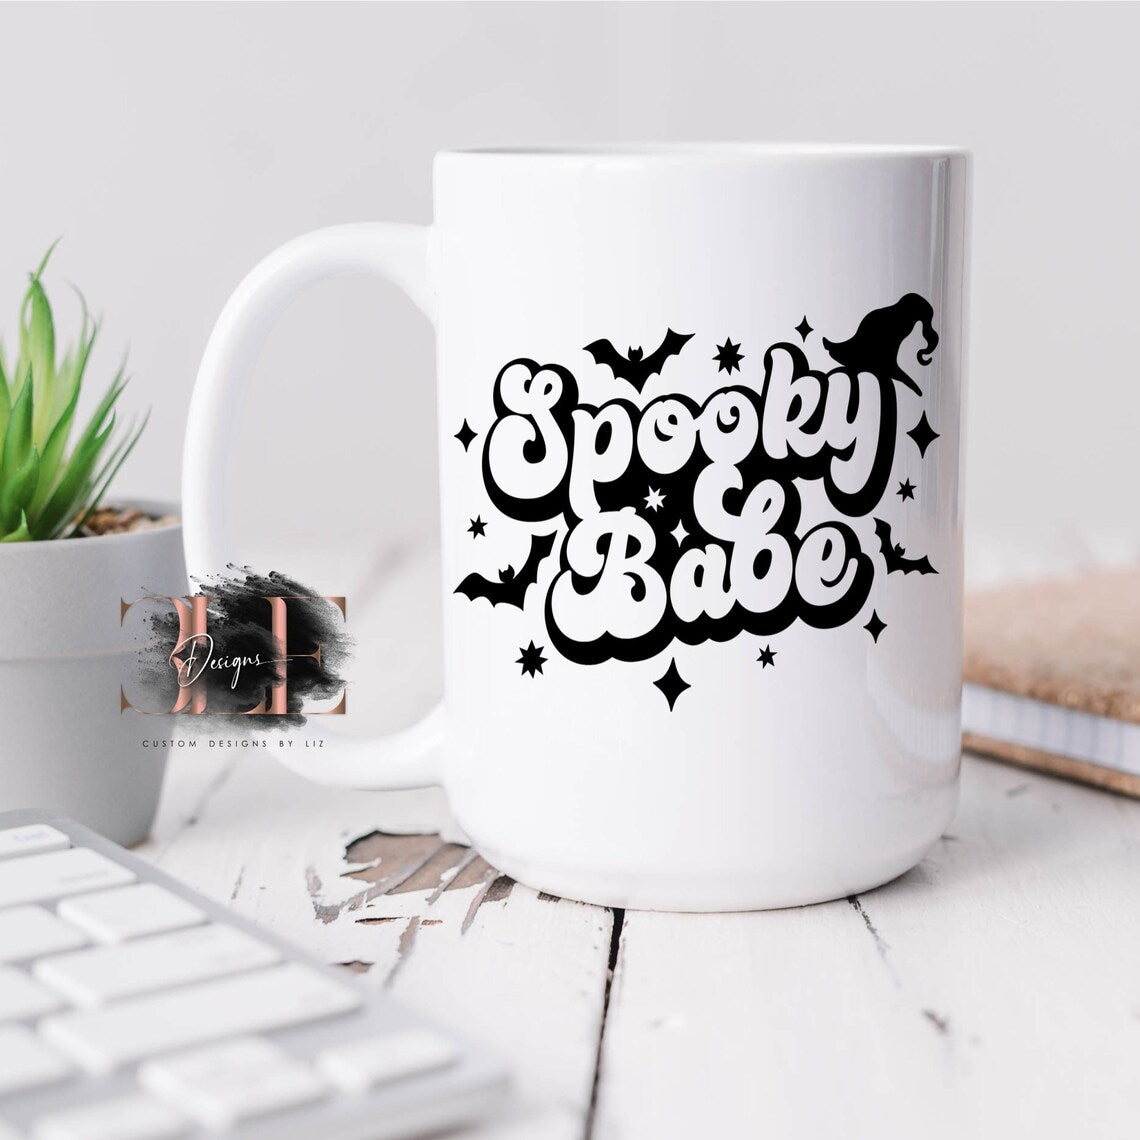 Spooky Babe Coffee Mug, Halloween Coffee Mug for Her, Gift Ideas for Women Coffee Lover Cup Gift Ideas, Bats and Witches Coffee Mug